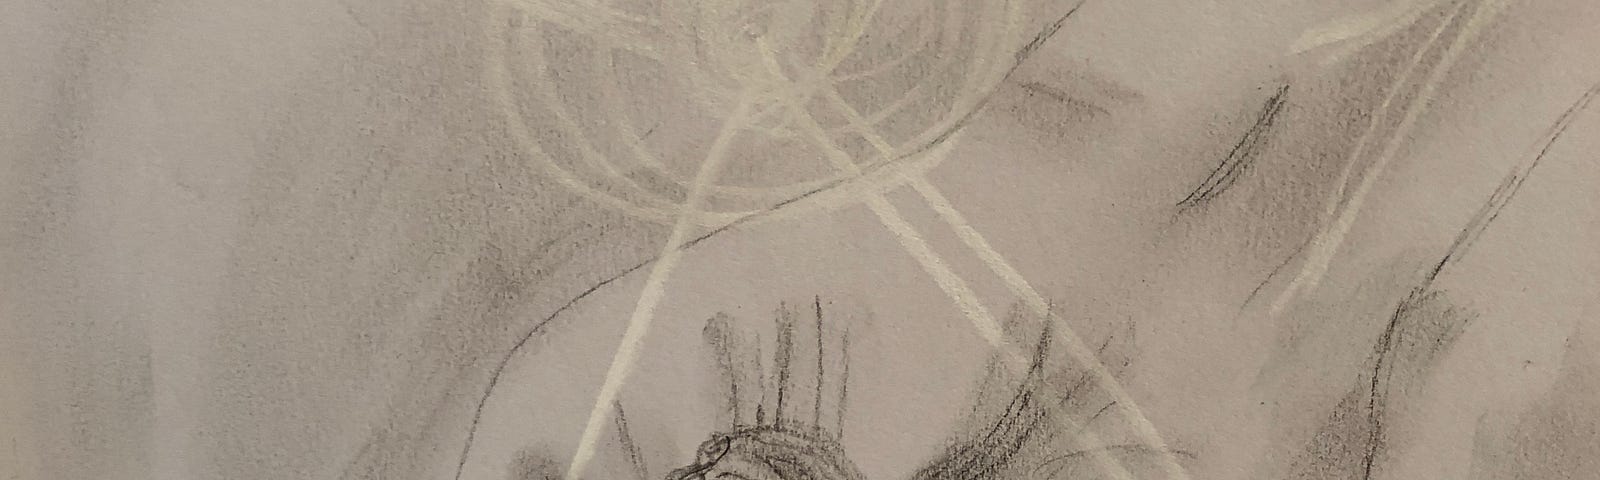 Pencil drawing of a hand reaching down with a woman sketched in the palm covering her eyes. The sketch shows a light reflection in a circle above, with rays shooting down around her.